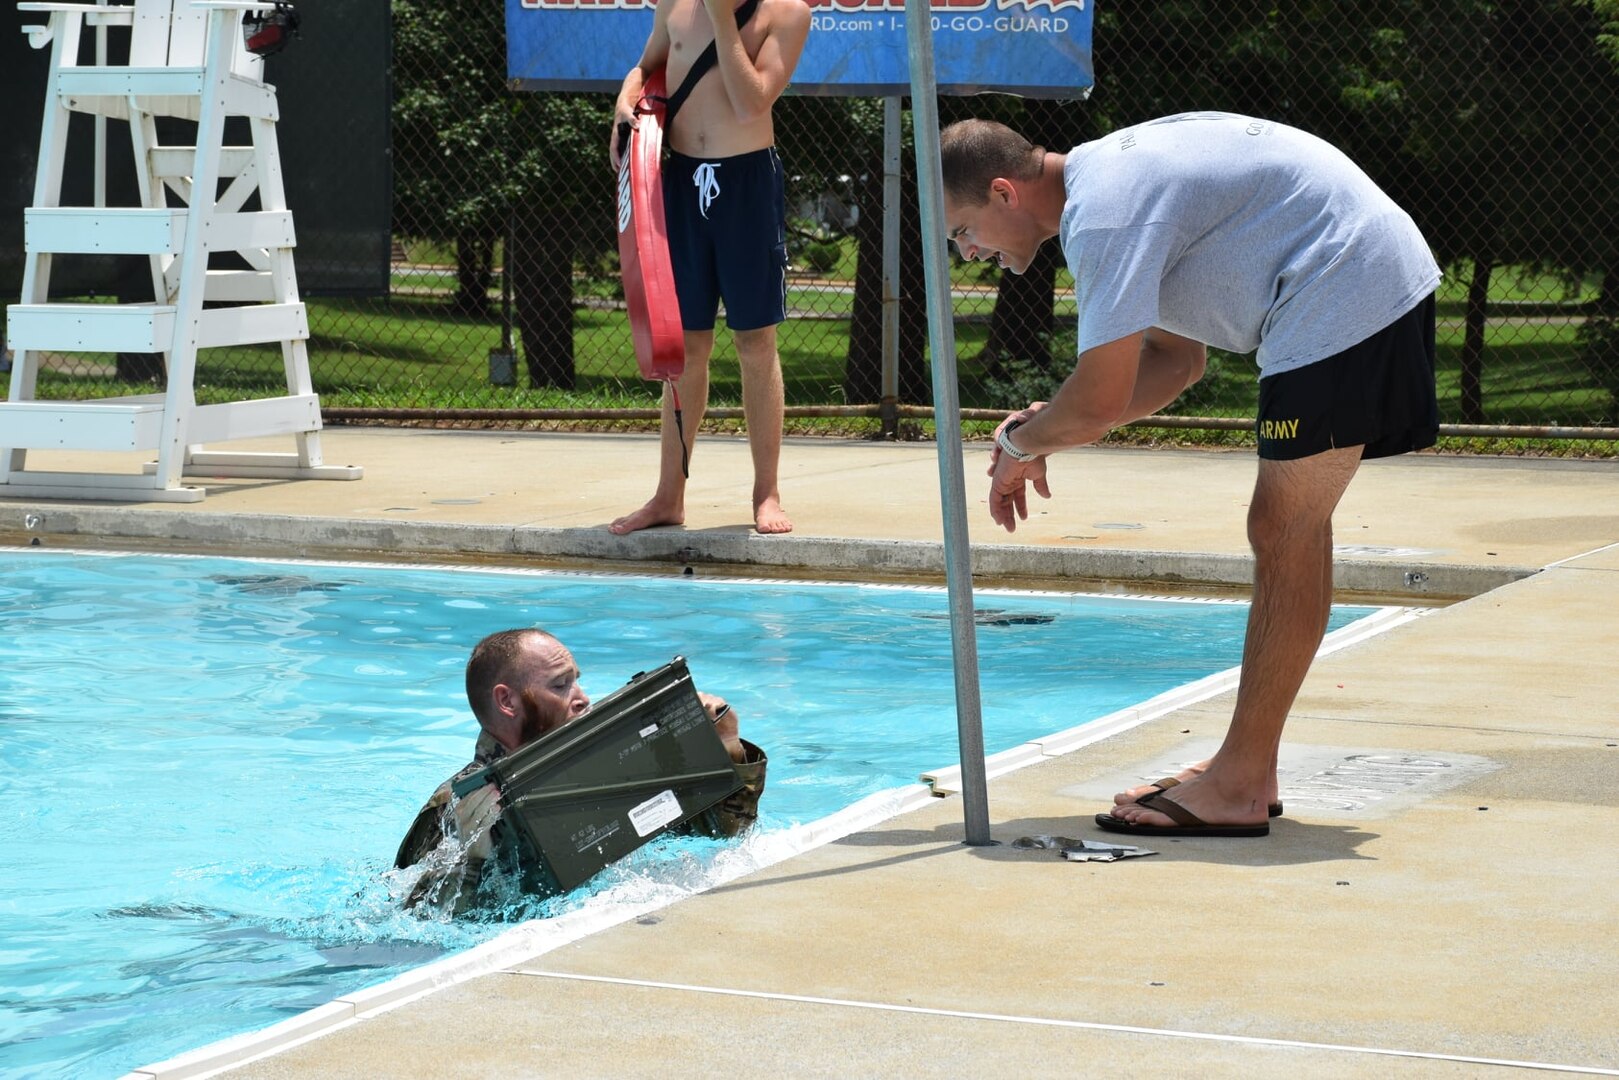 Virginia Army National Guard recruiters challenge area lifeguards at the 3rd Annual National Guard Water Sports Challenge, held July 10, 2021, at the Miller Park Pool in Lynchburg, Virginia. (Courtesy photo)